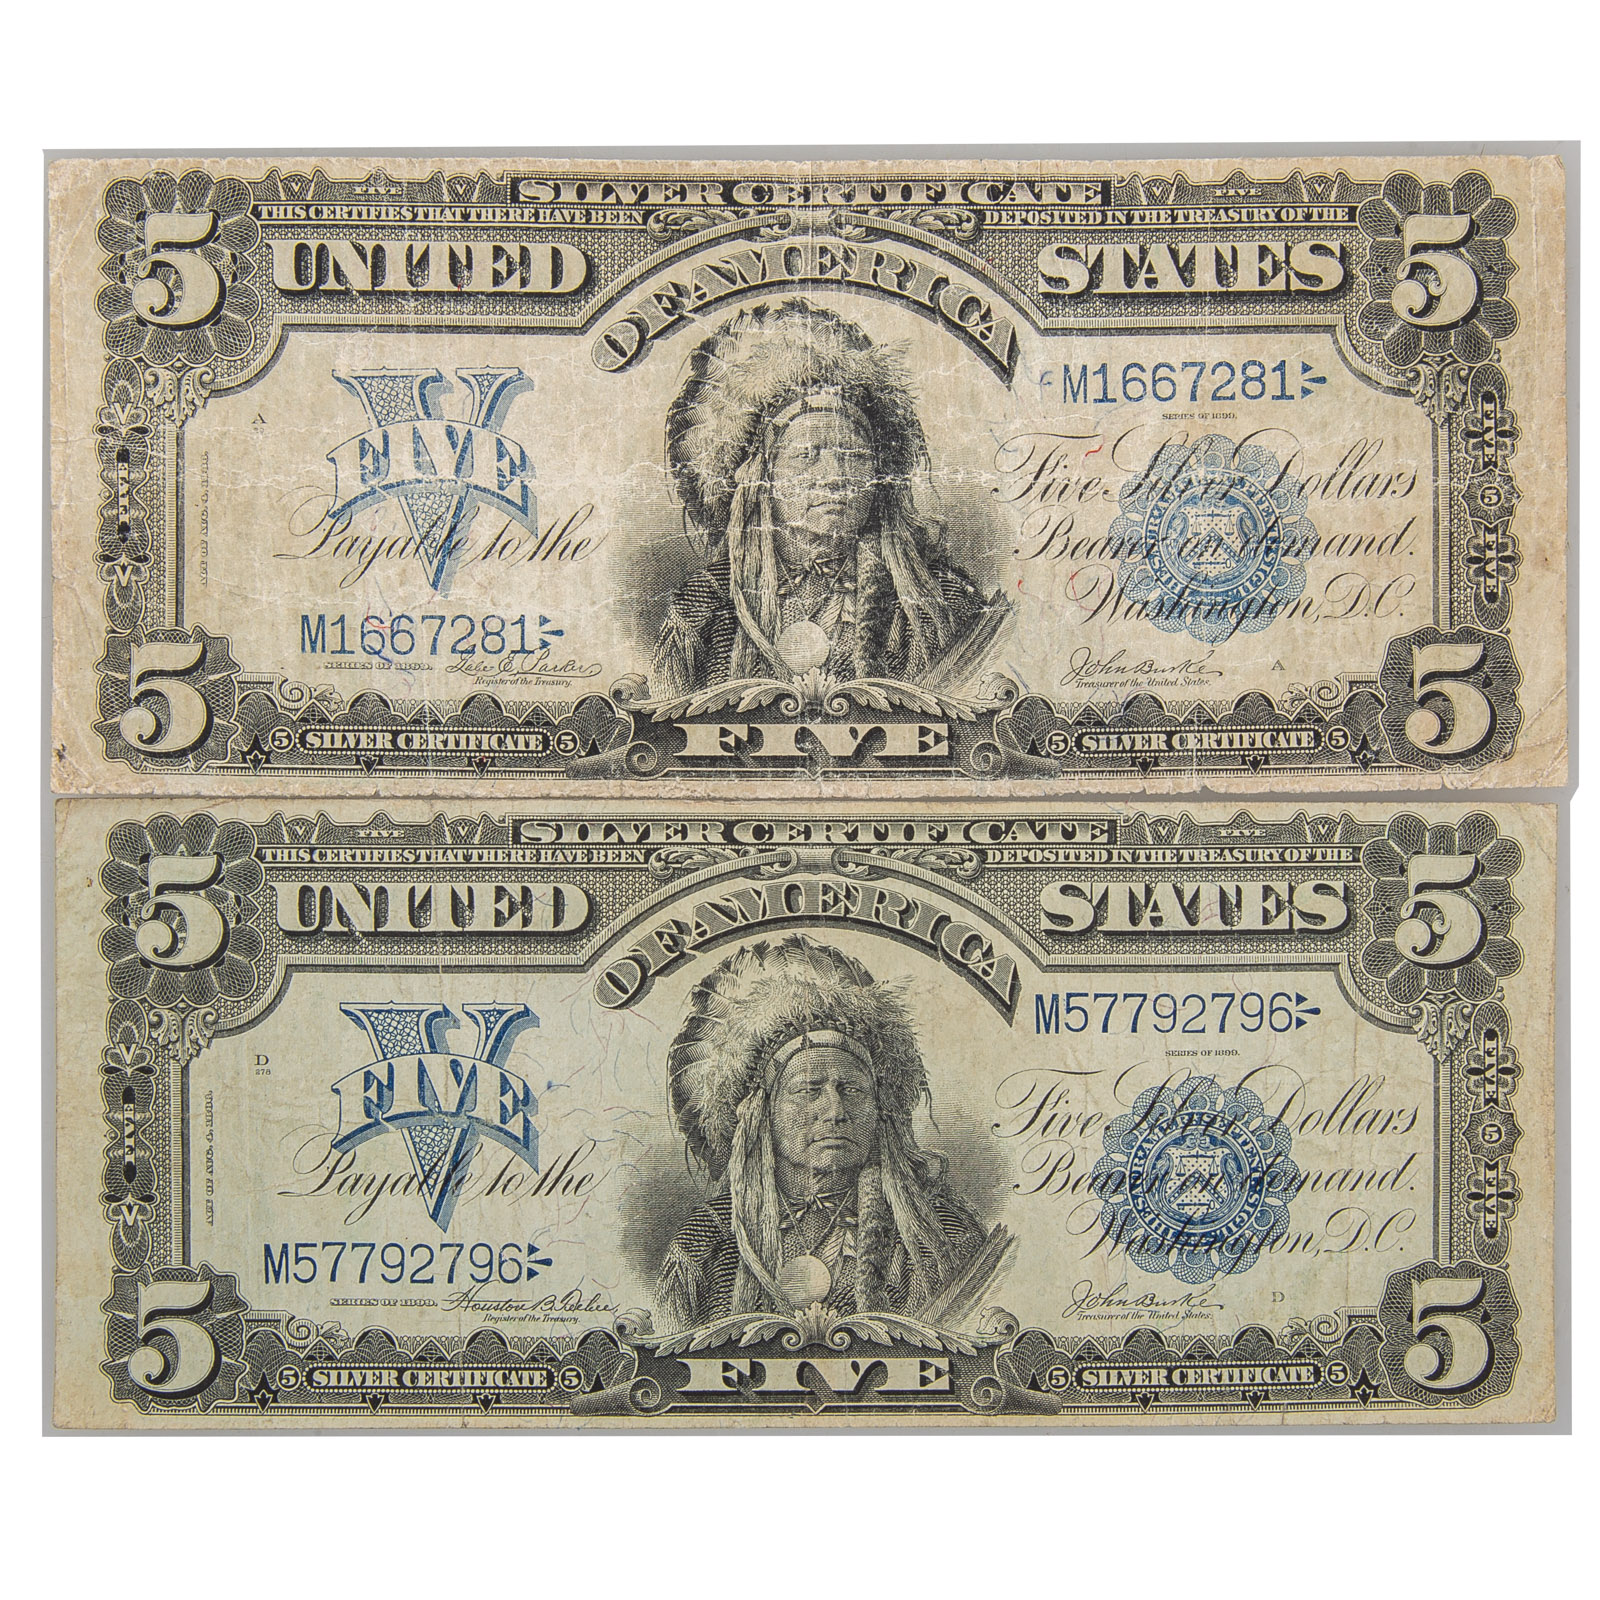 A PAIR OF 1899 5 SILVER CERTIFICATE 334134